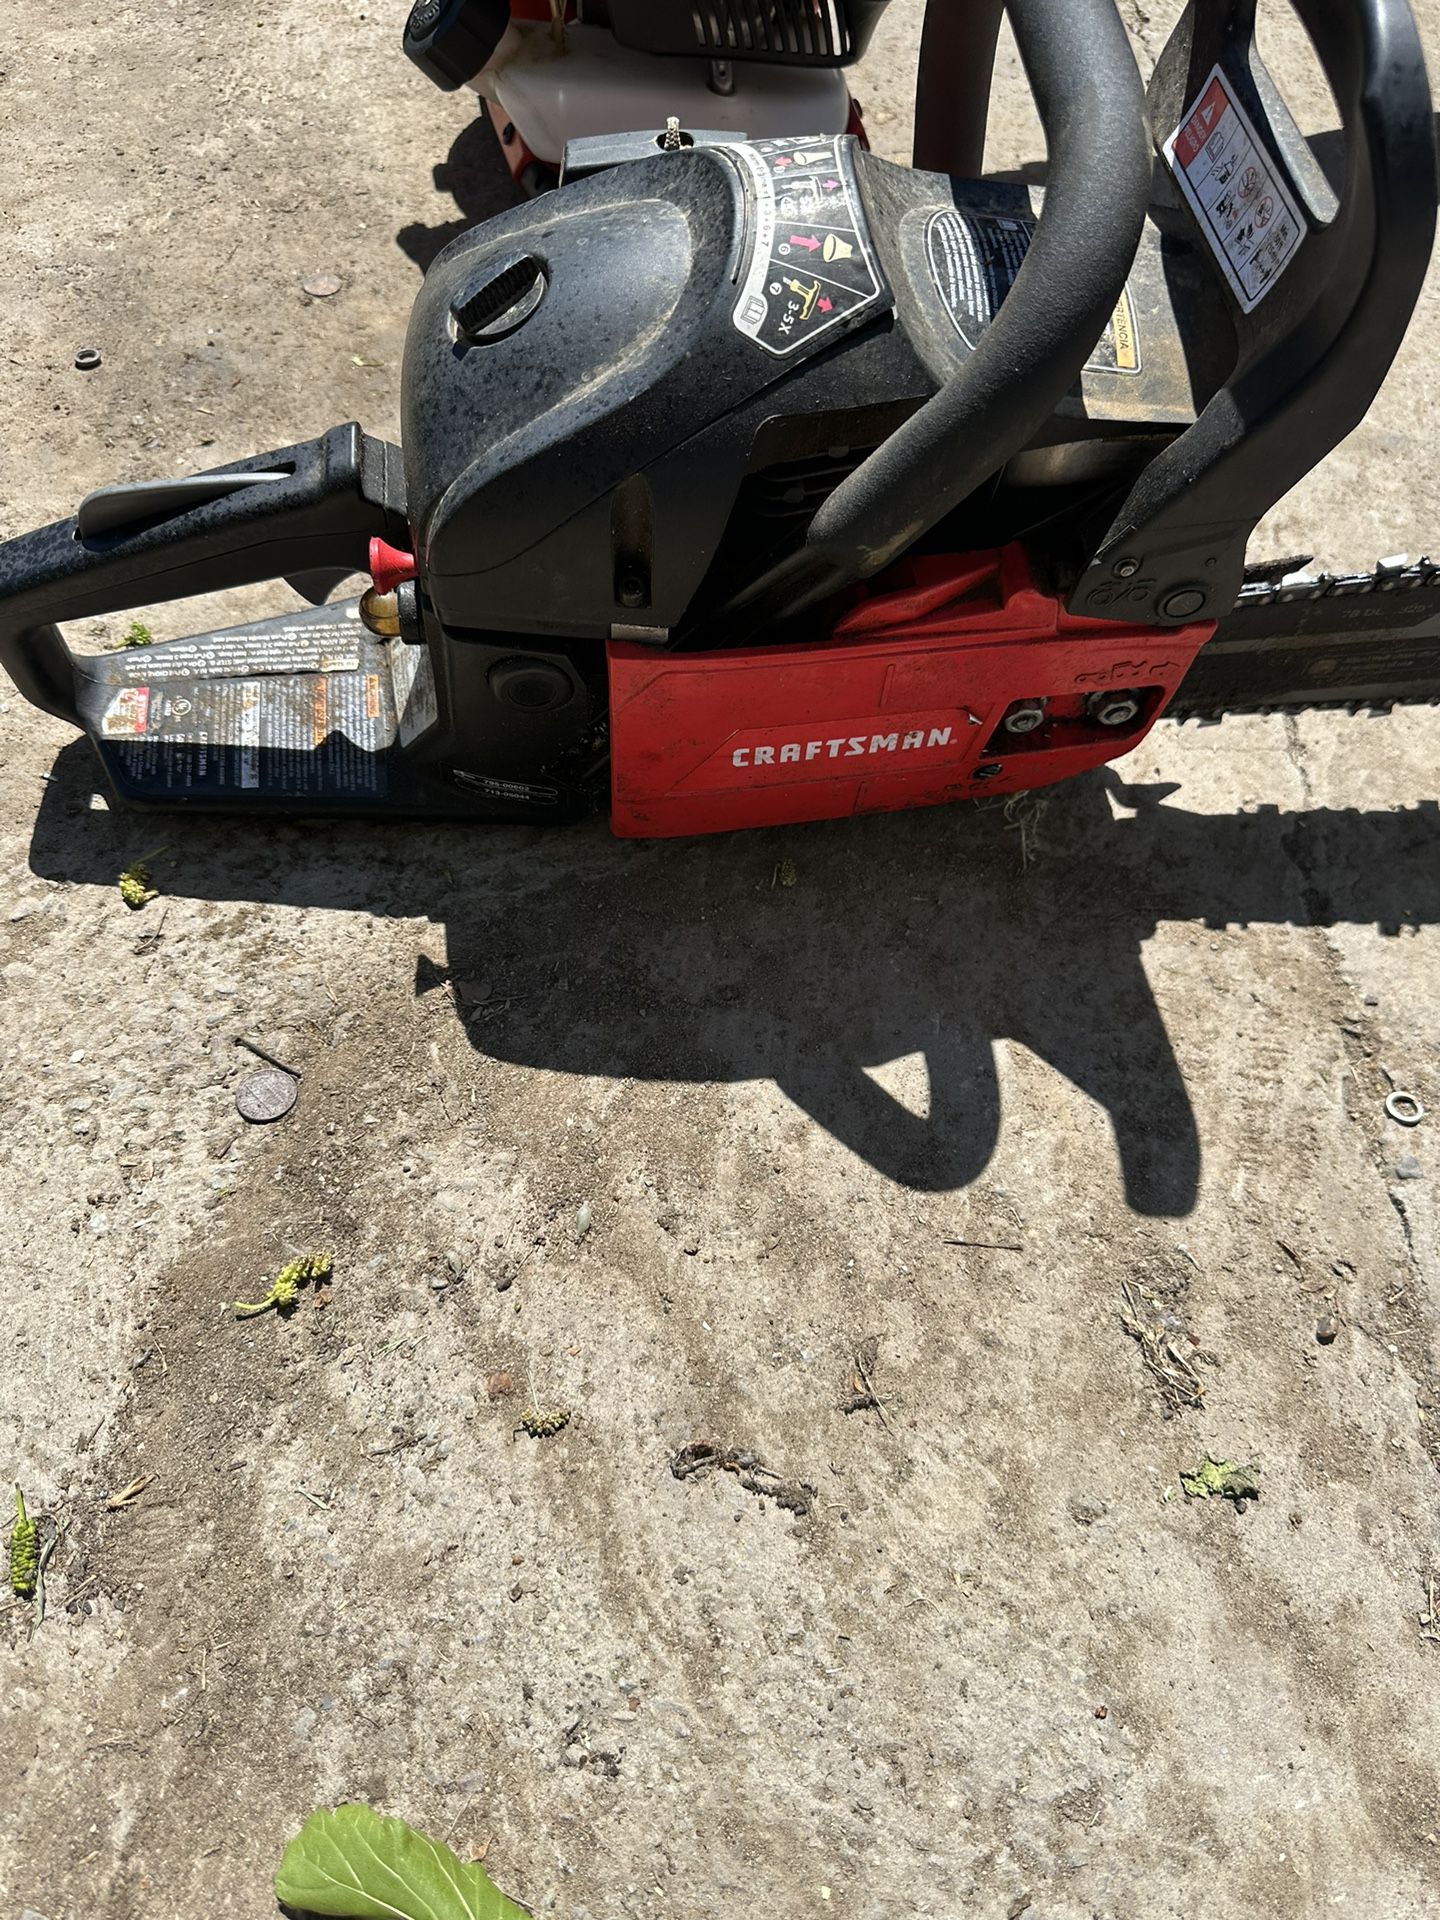 Craftsman Chainsaw And Home Lite Blower 